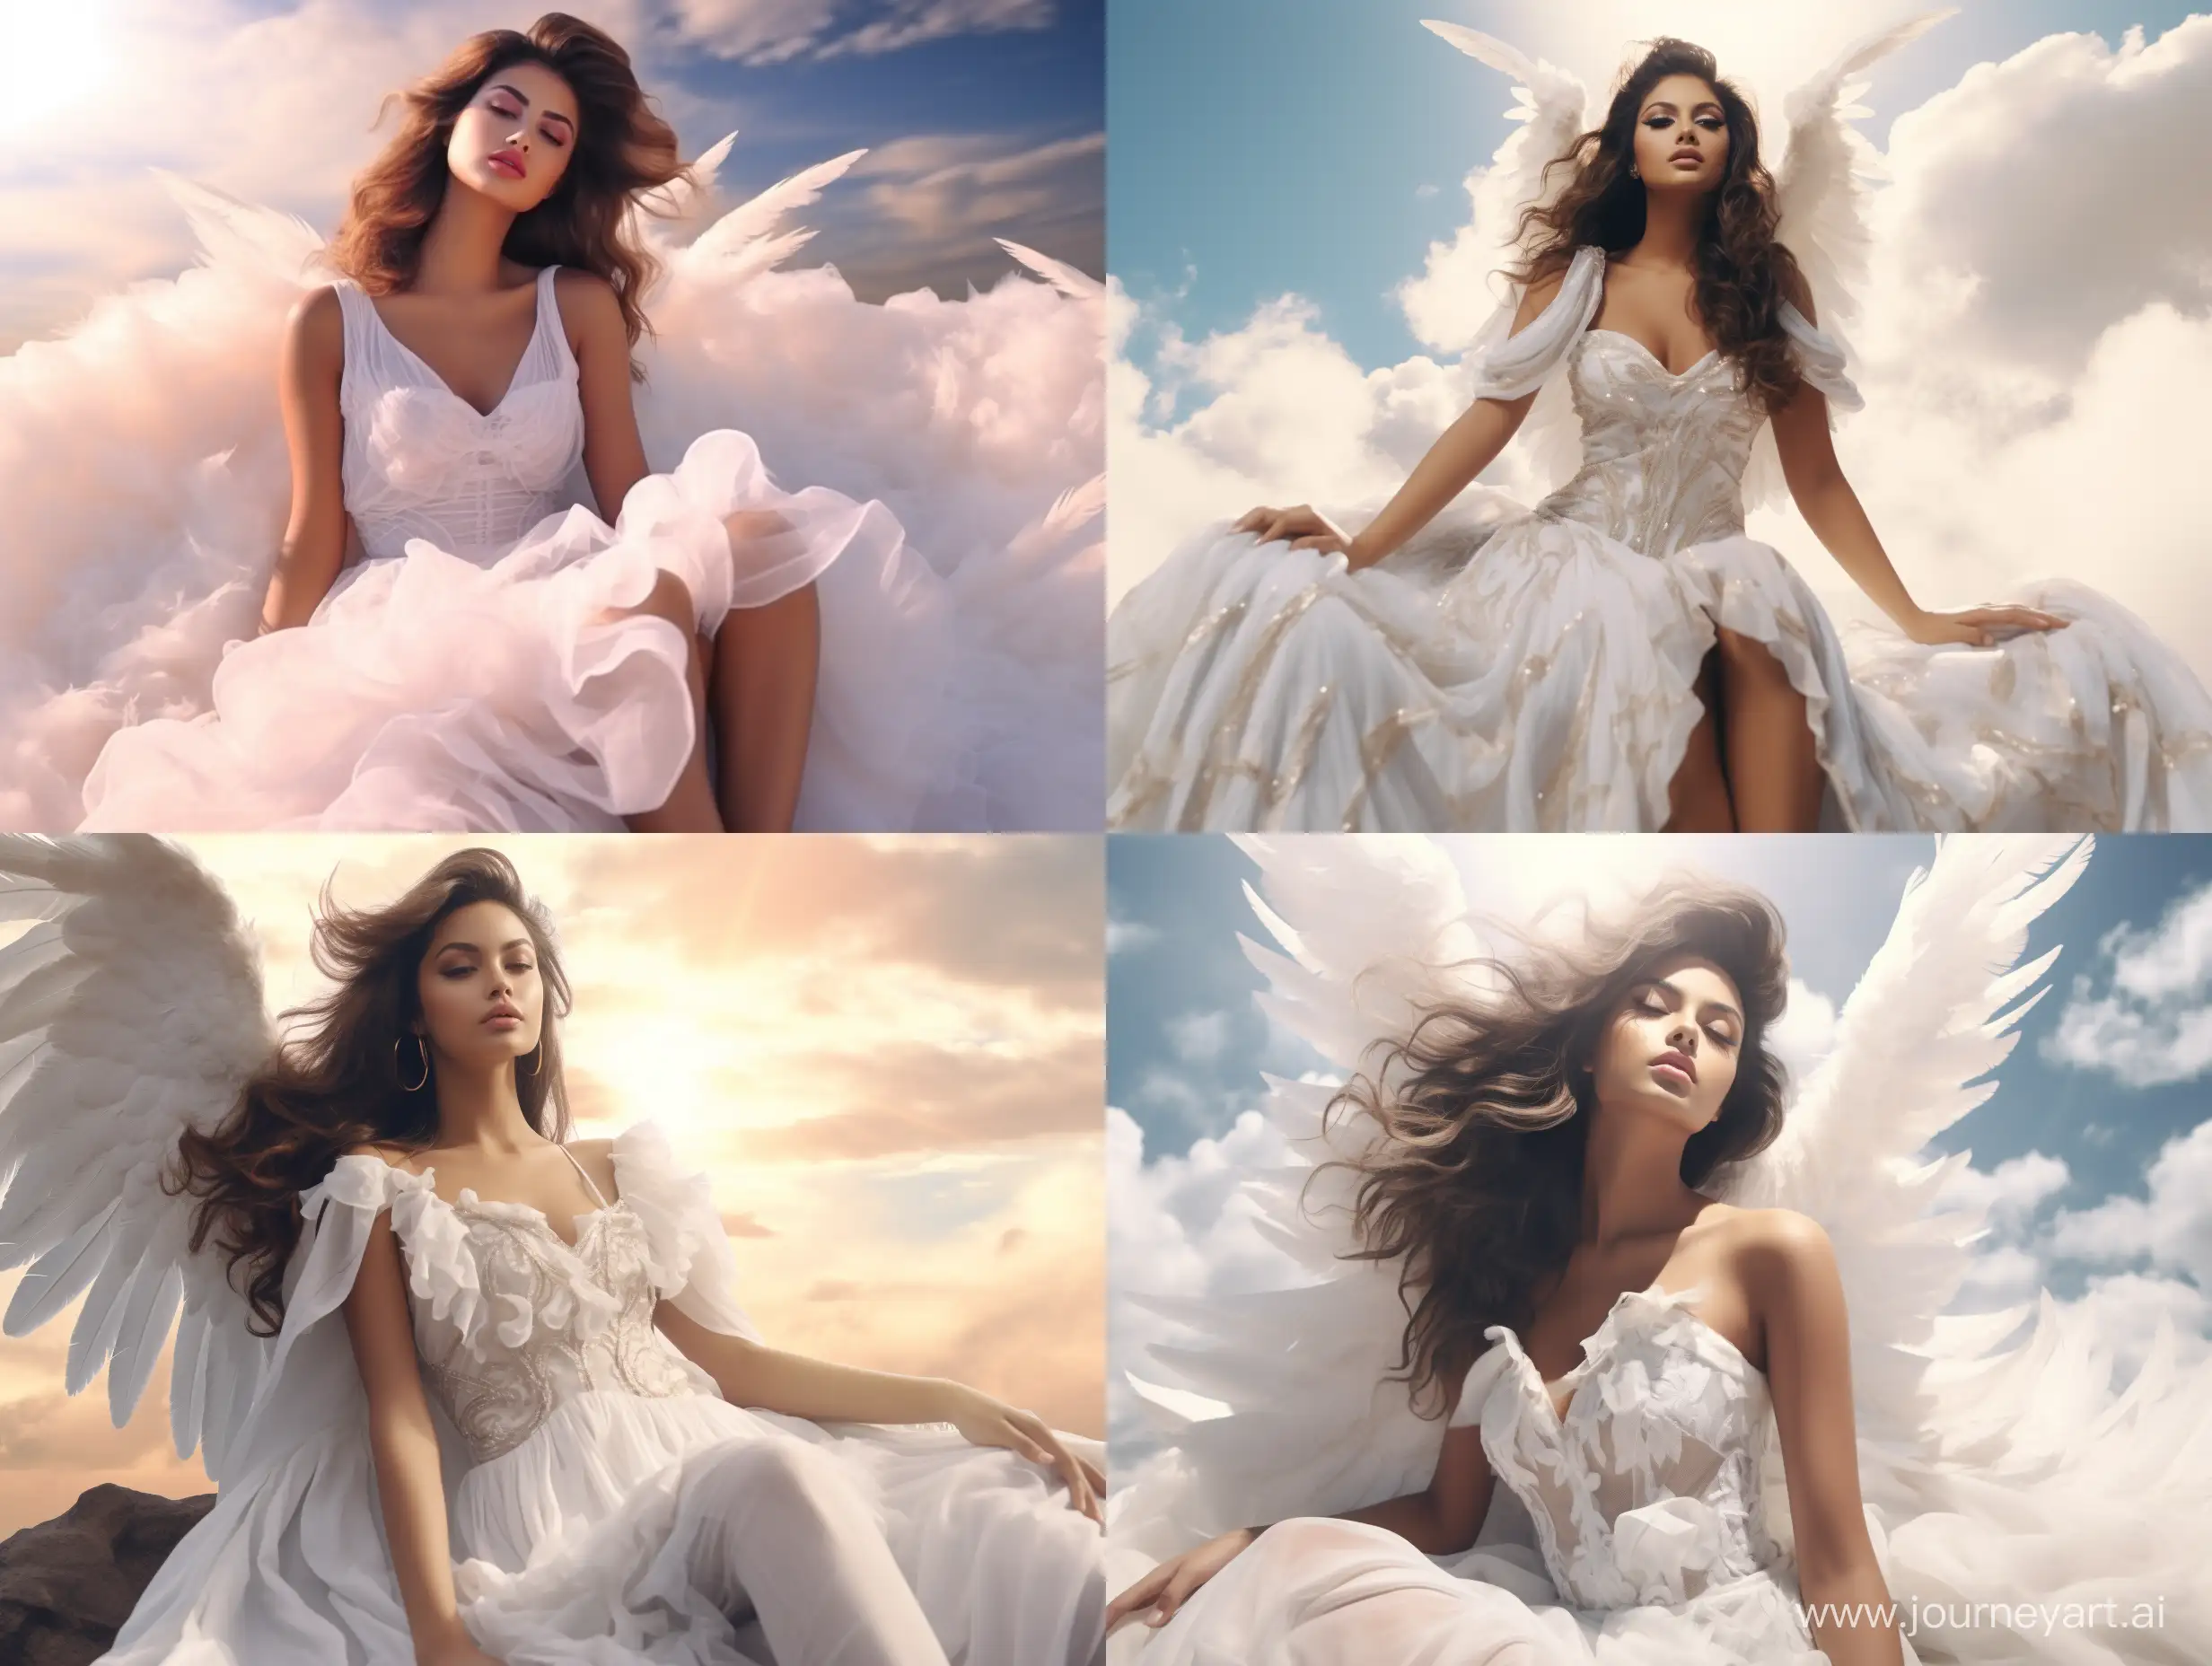 Selena Gomez portrayed as an angel in a realistic style, perched on high clouds, with majestic wings unfurled, wearing an elegant, celestial dress, backlit with heavenly light, against a realistic, tranquil sky, cinematic music video aesthetics